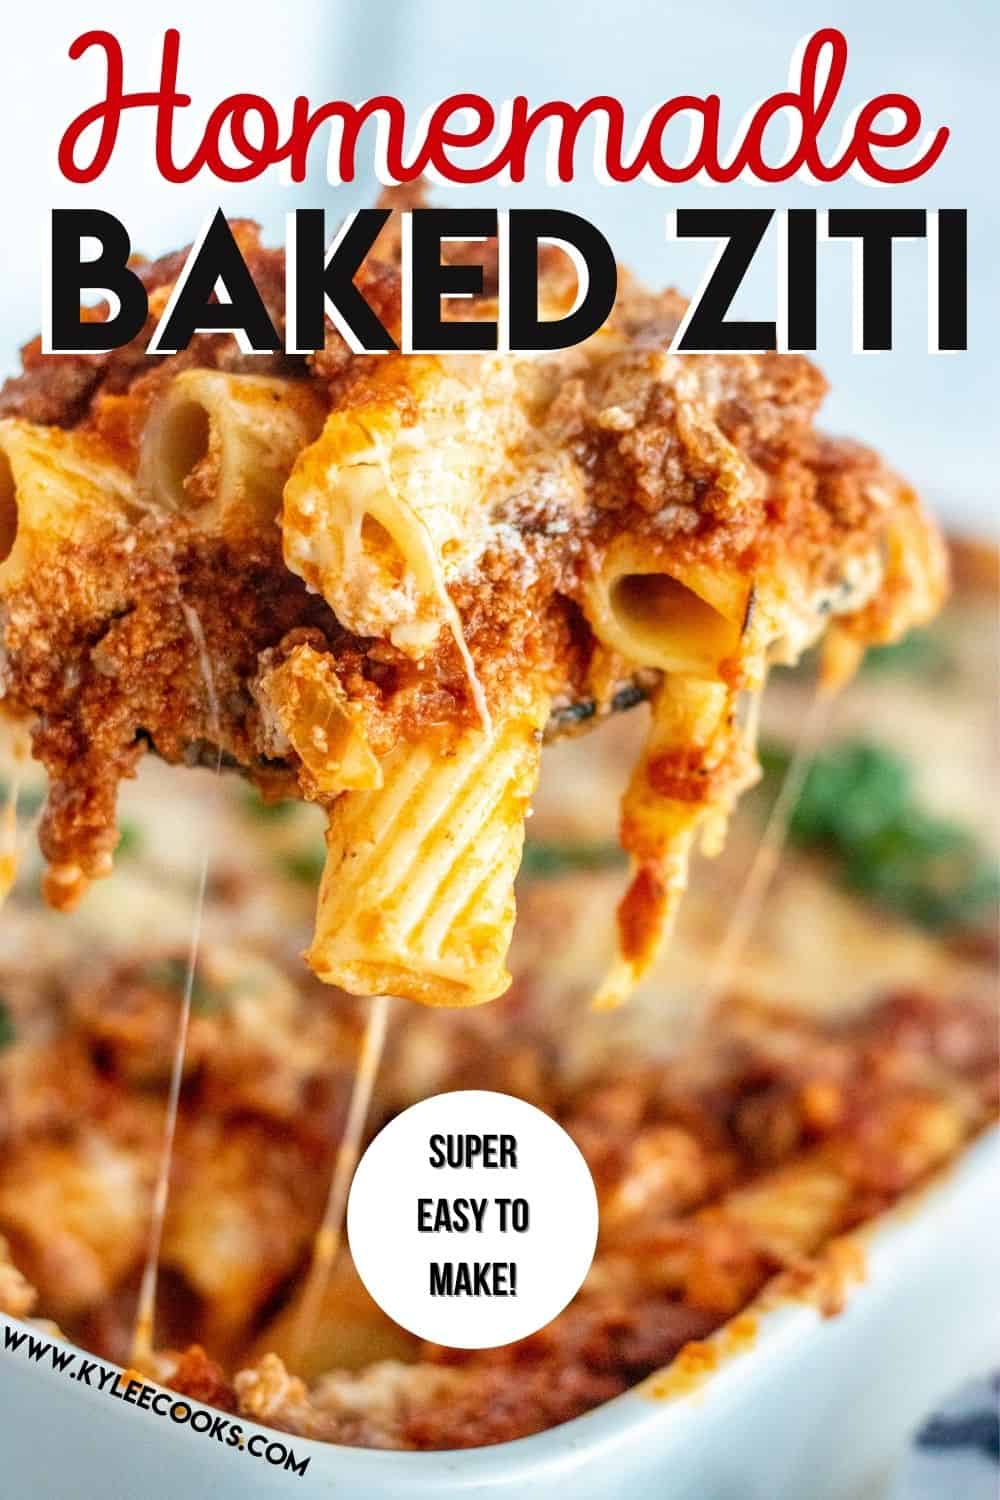 Baked ziti in a white baking dish with recipe name overlaid in text